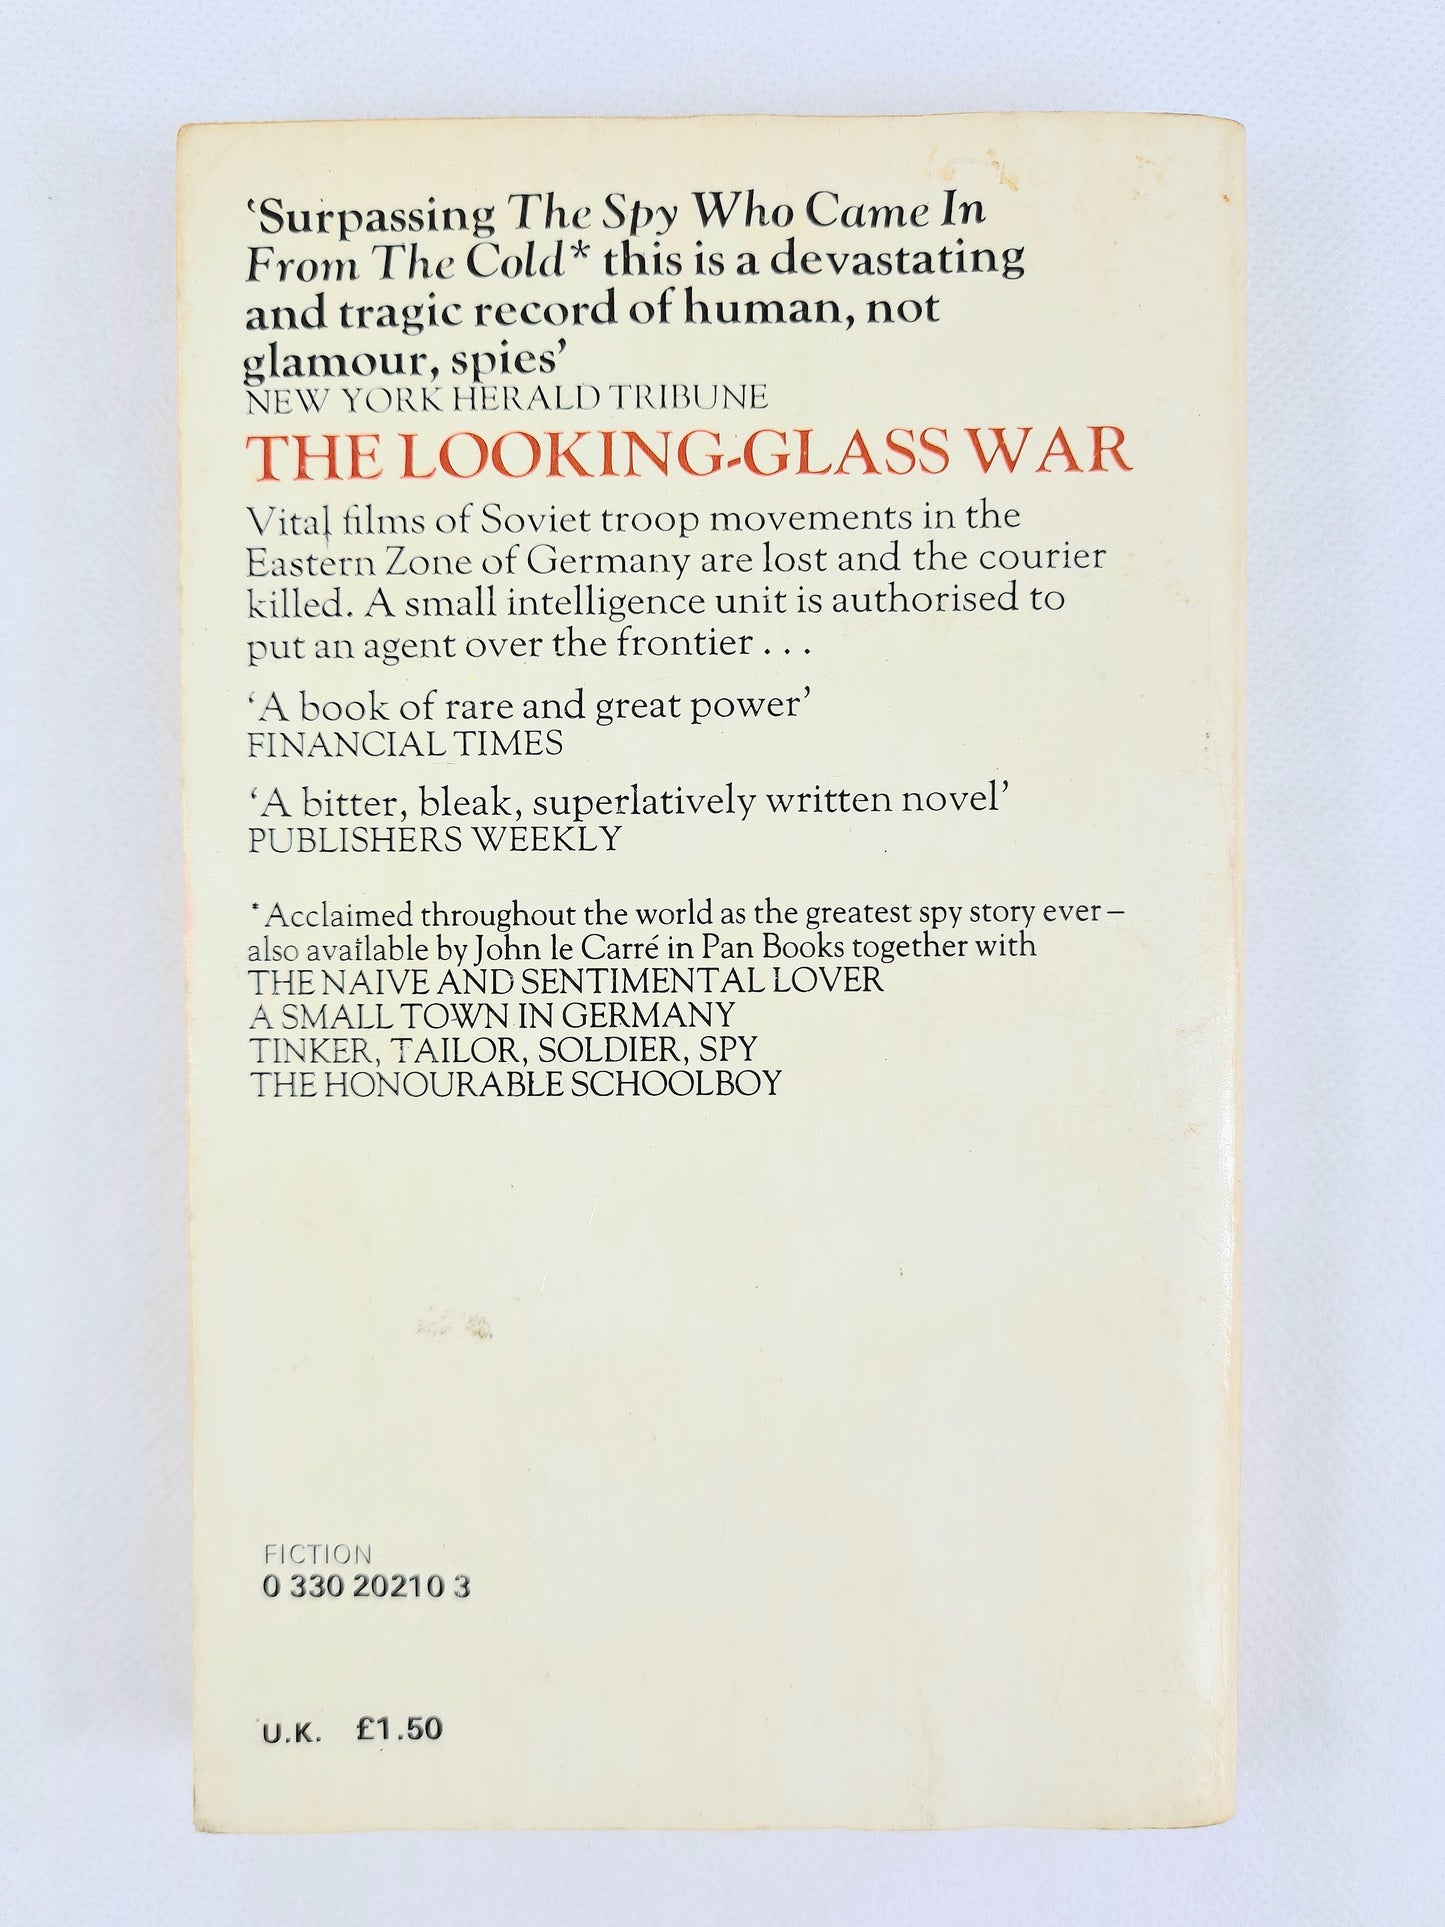 The Looking Glass War by John Le Carre. Vintage paperback books. Pan book